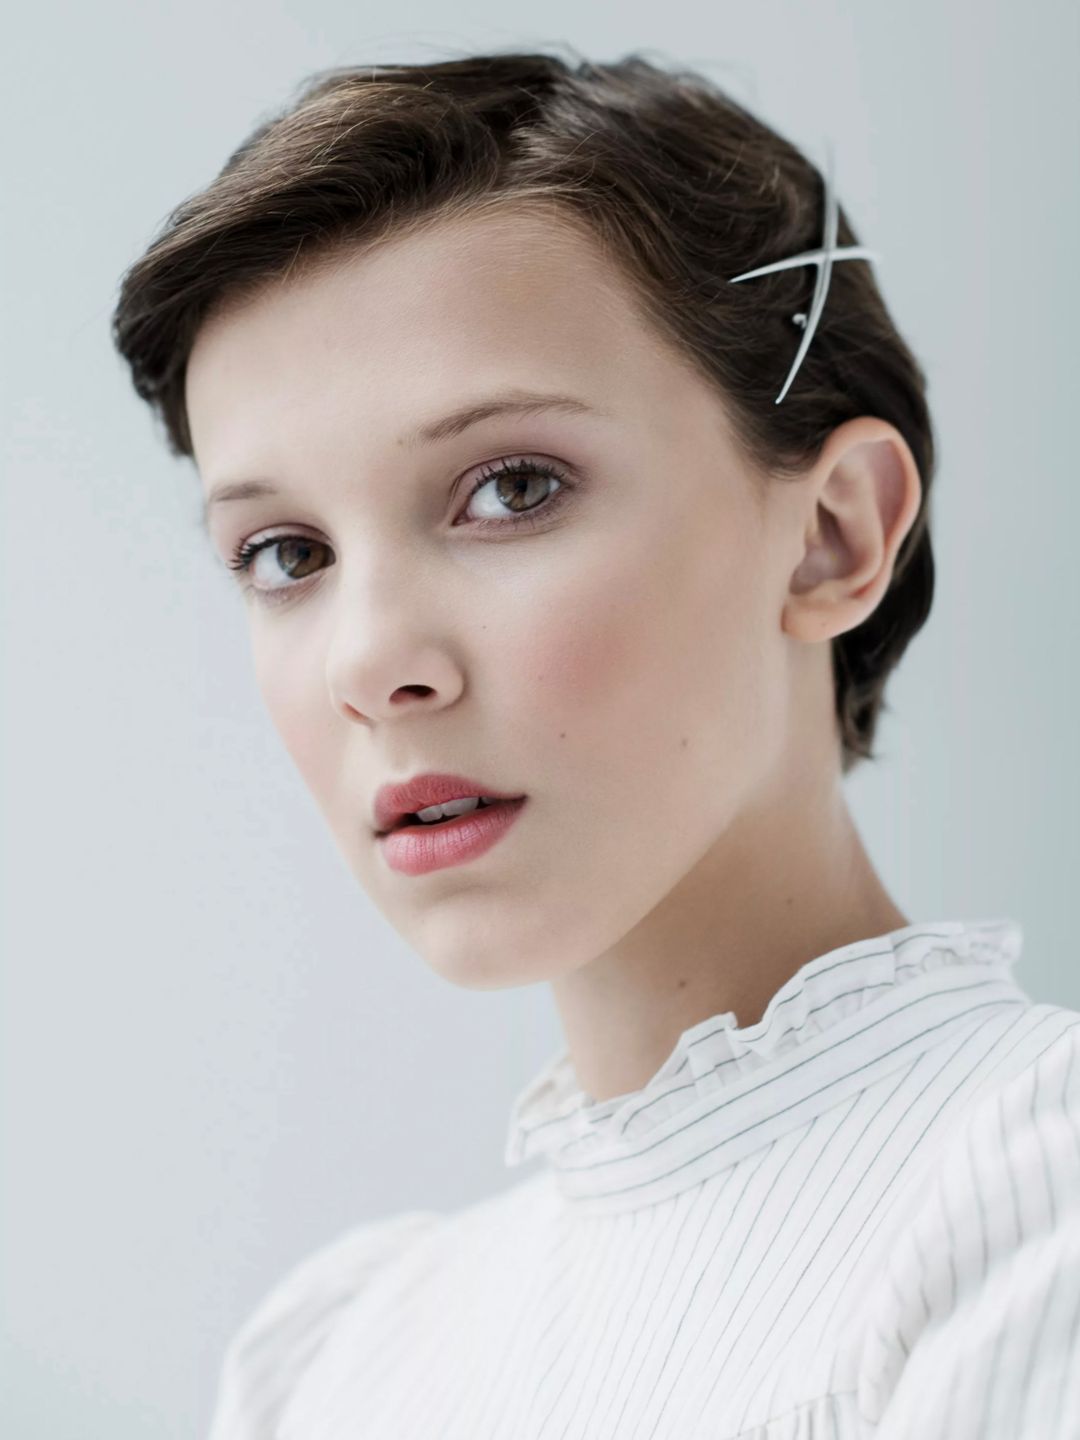 Millie Bobby Brown appearance